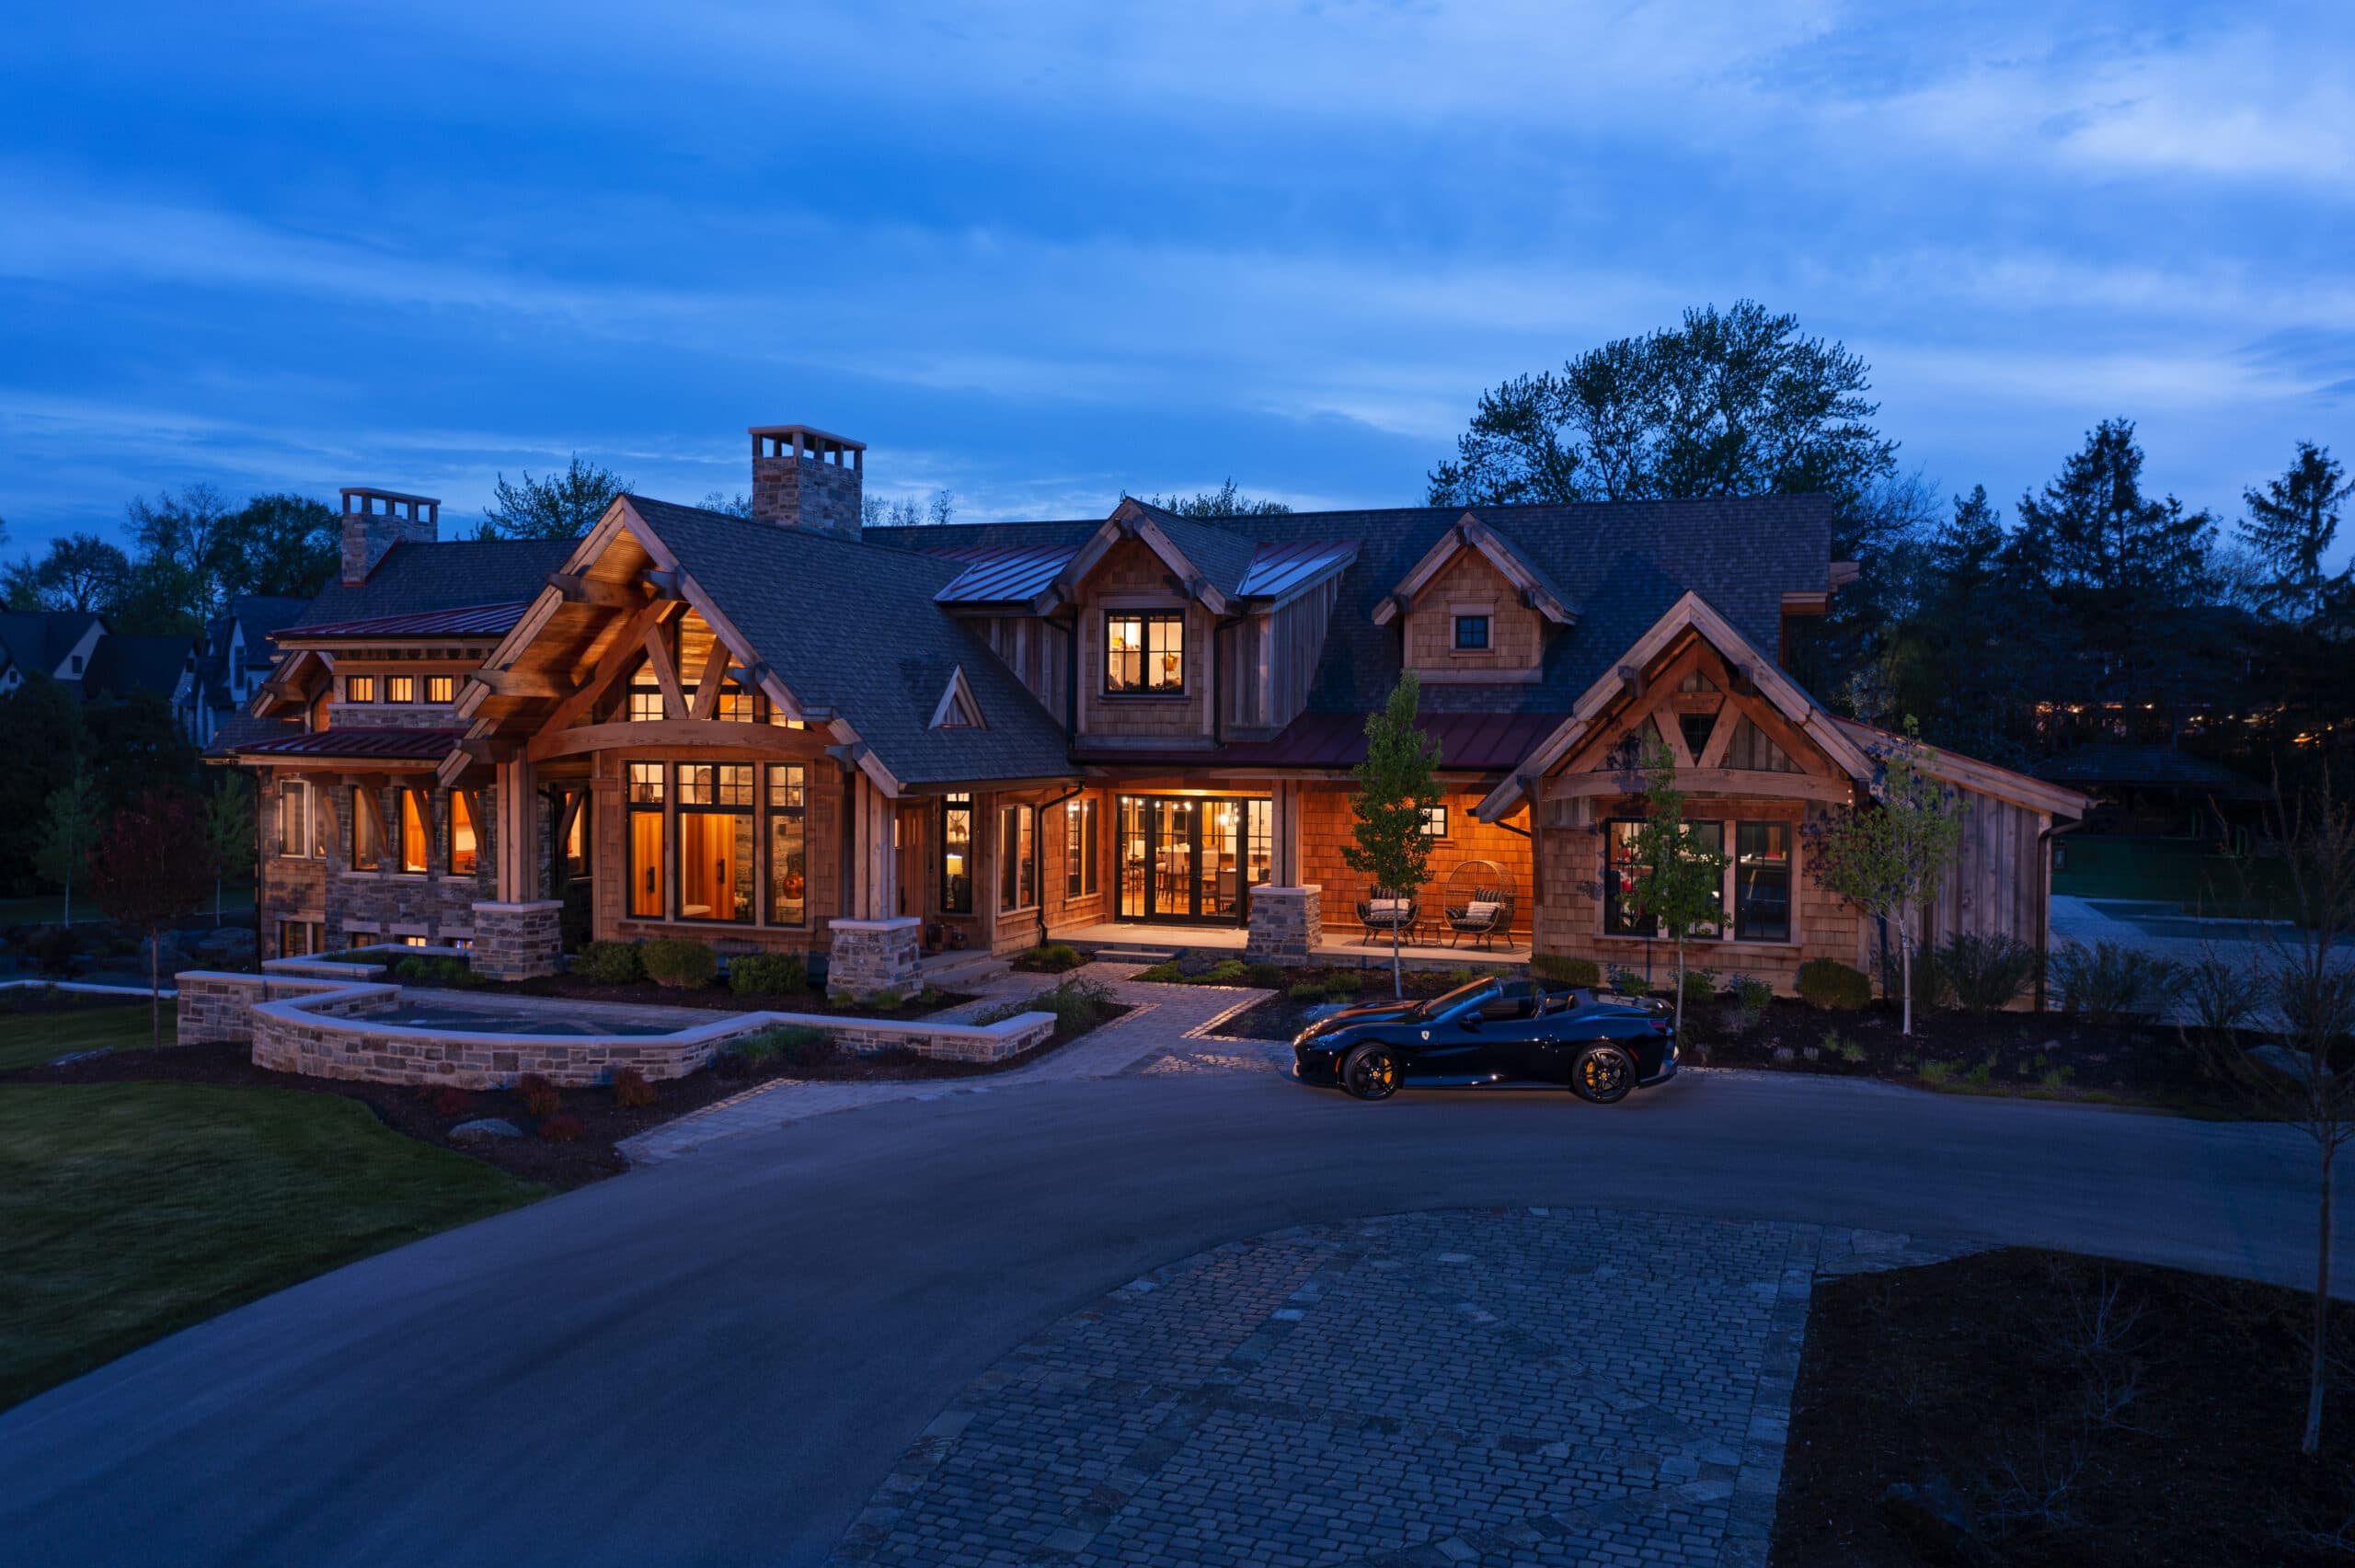 Reclaimed Barn Wood Timber Frame Home Exterior Single Family Residence Luxury Property Custom Designed by Michael Donohue with Stillwater Architecture